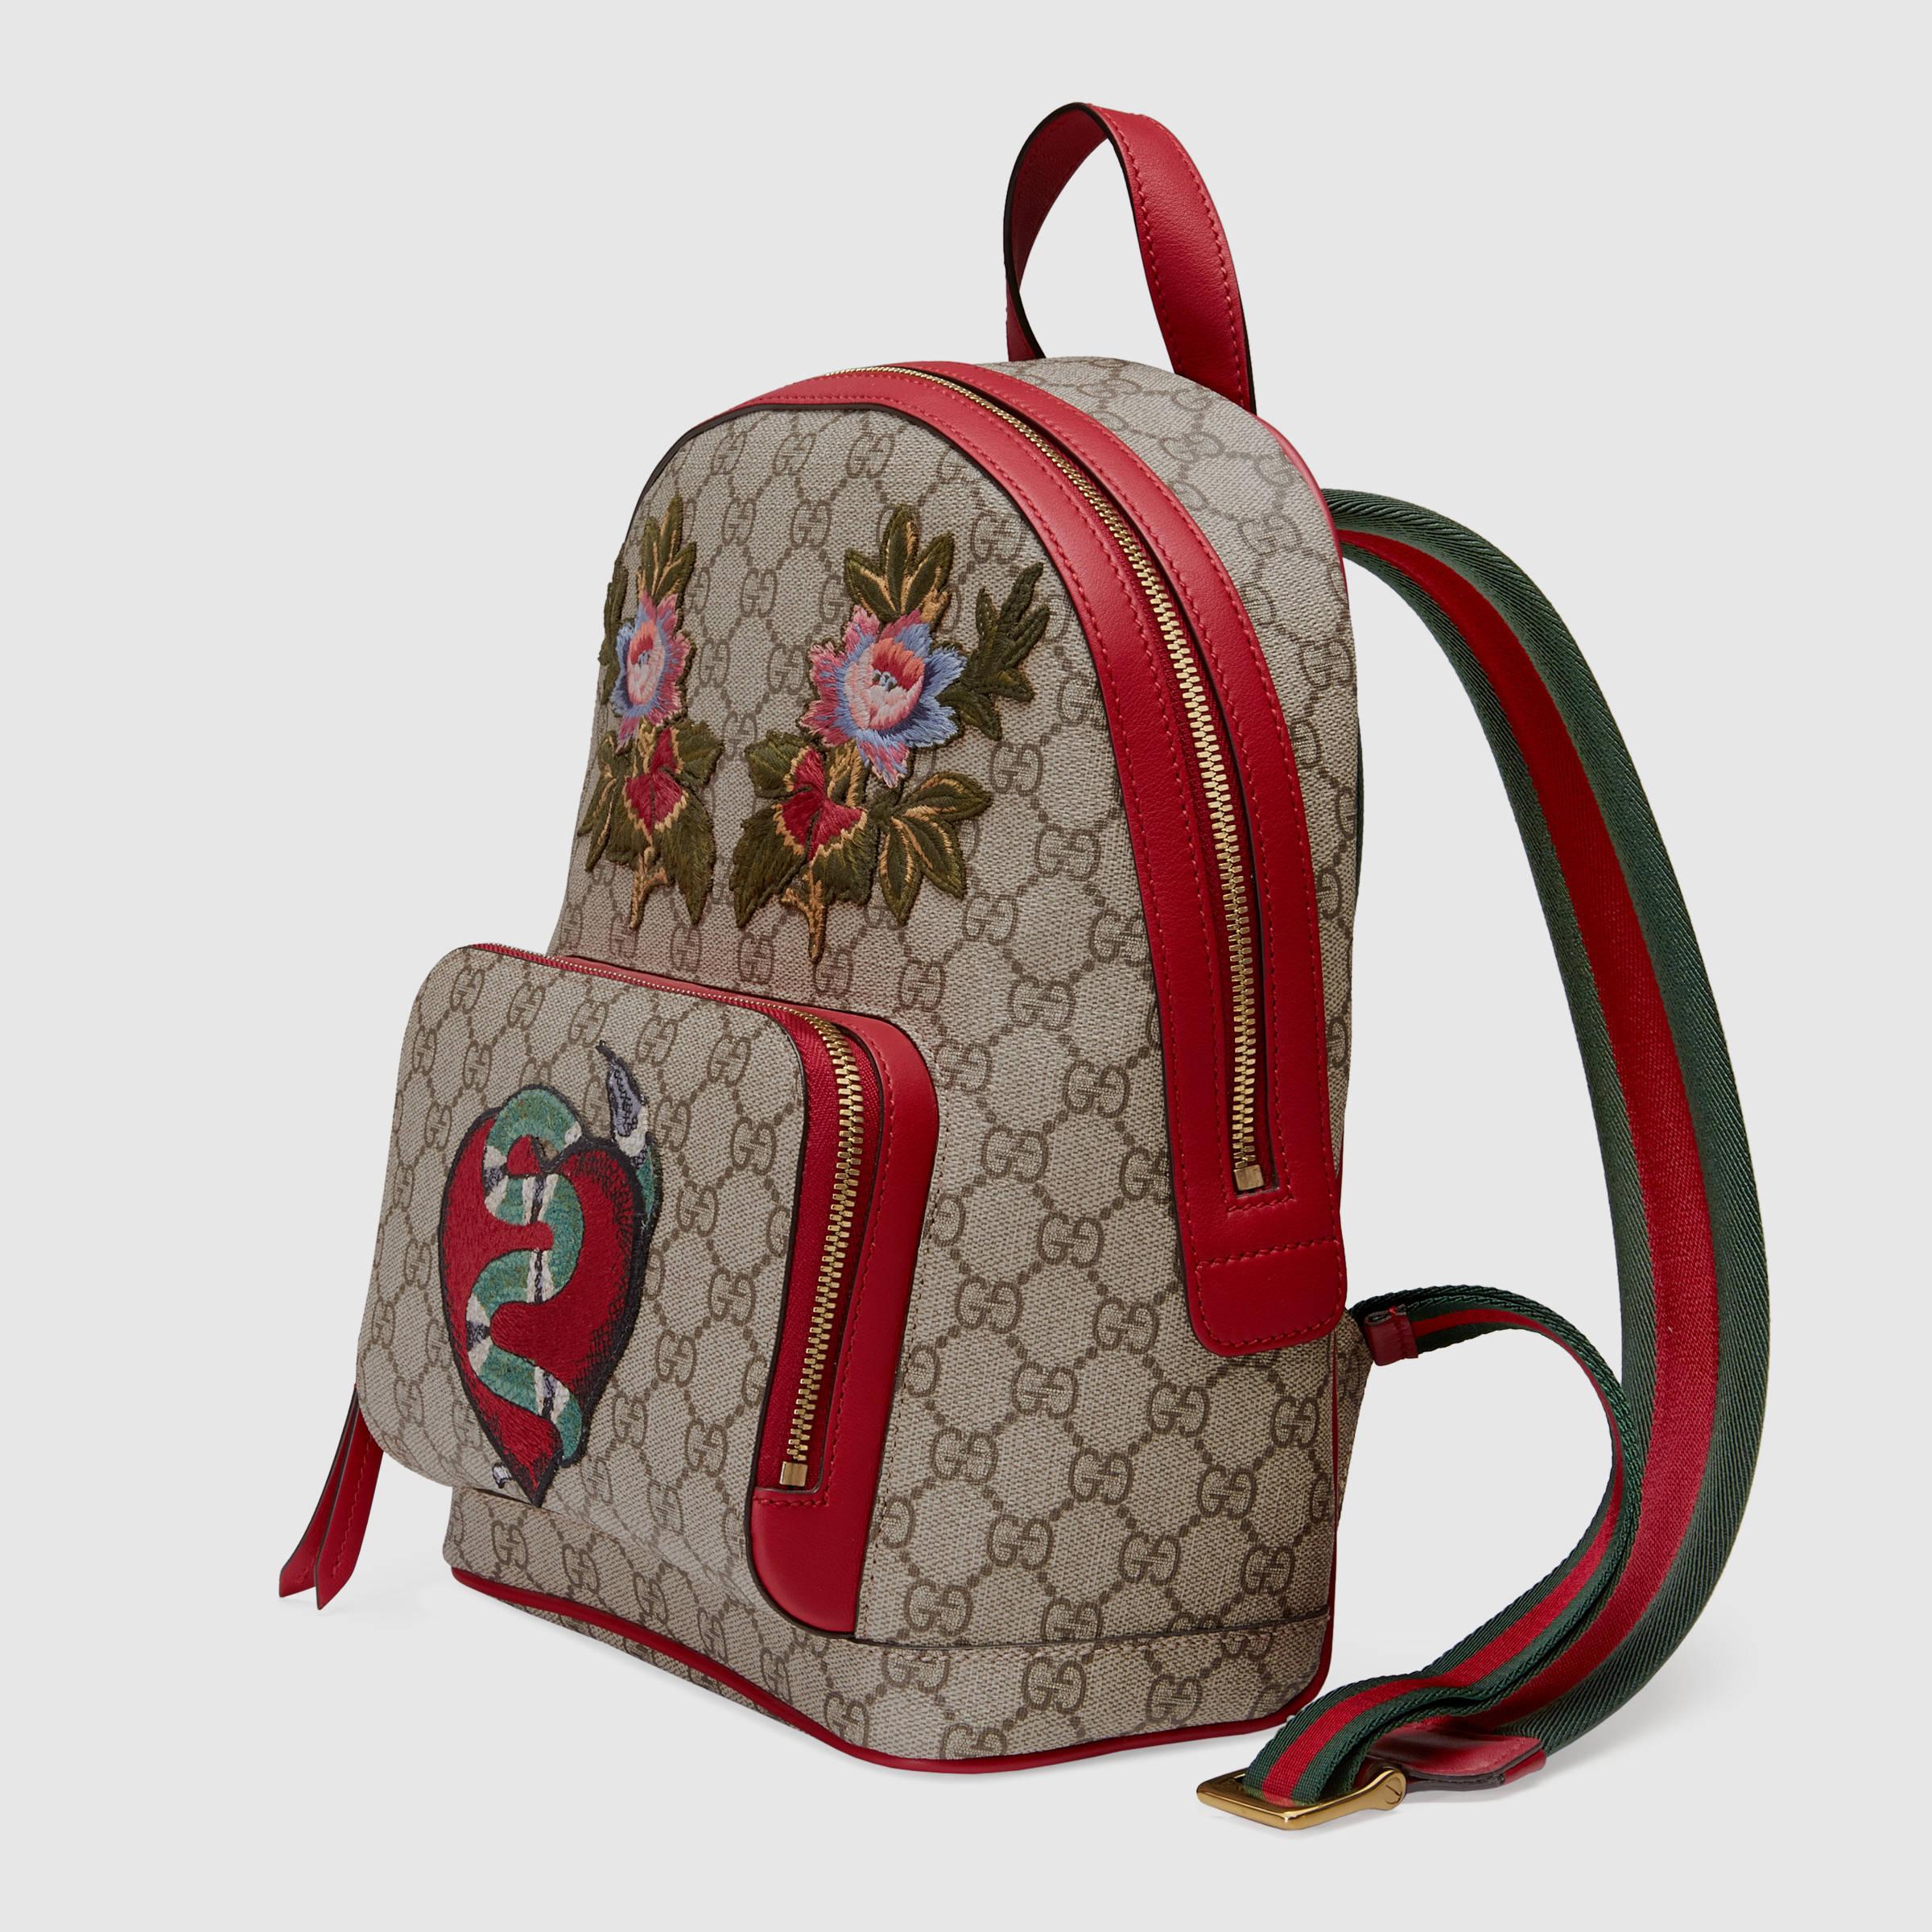 Gucci Limited Edition Gg Supreme Backpack - Lyst